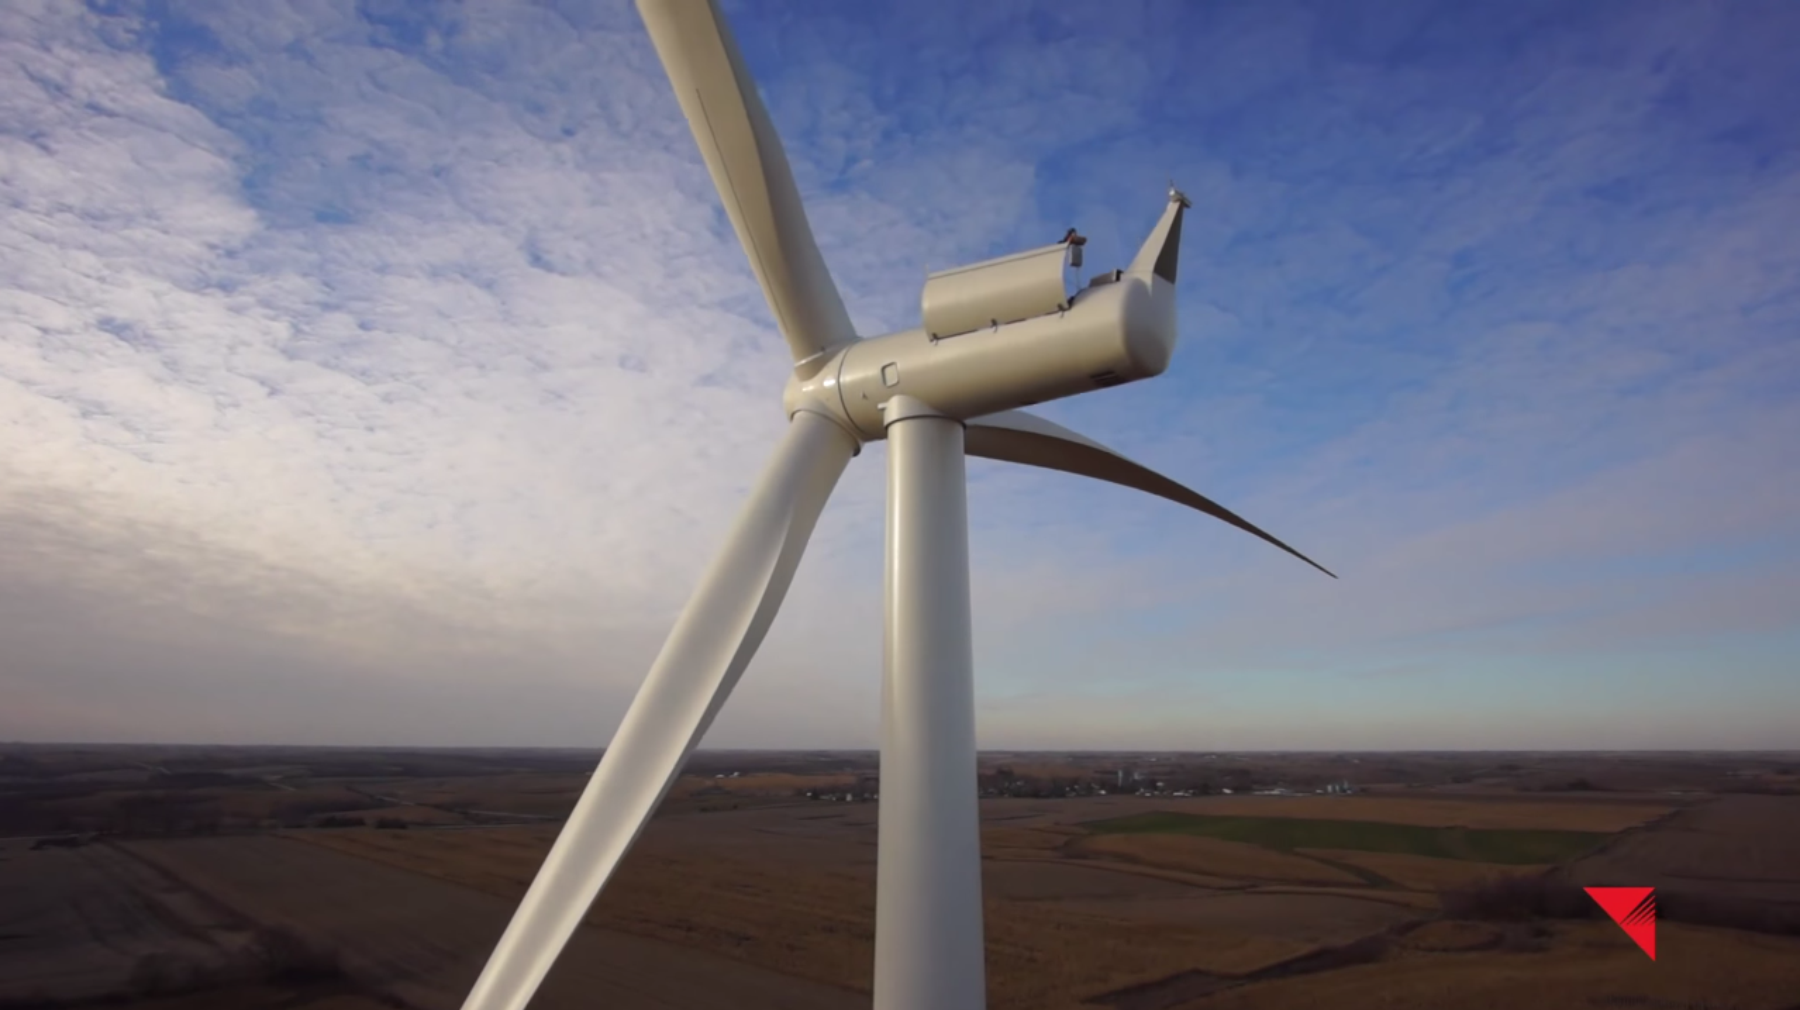 Ever wonder how a wind turbine is built?